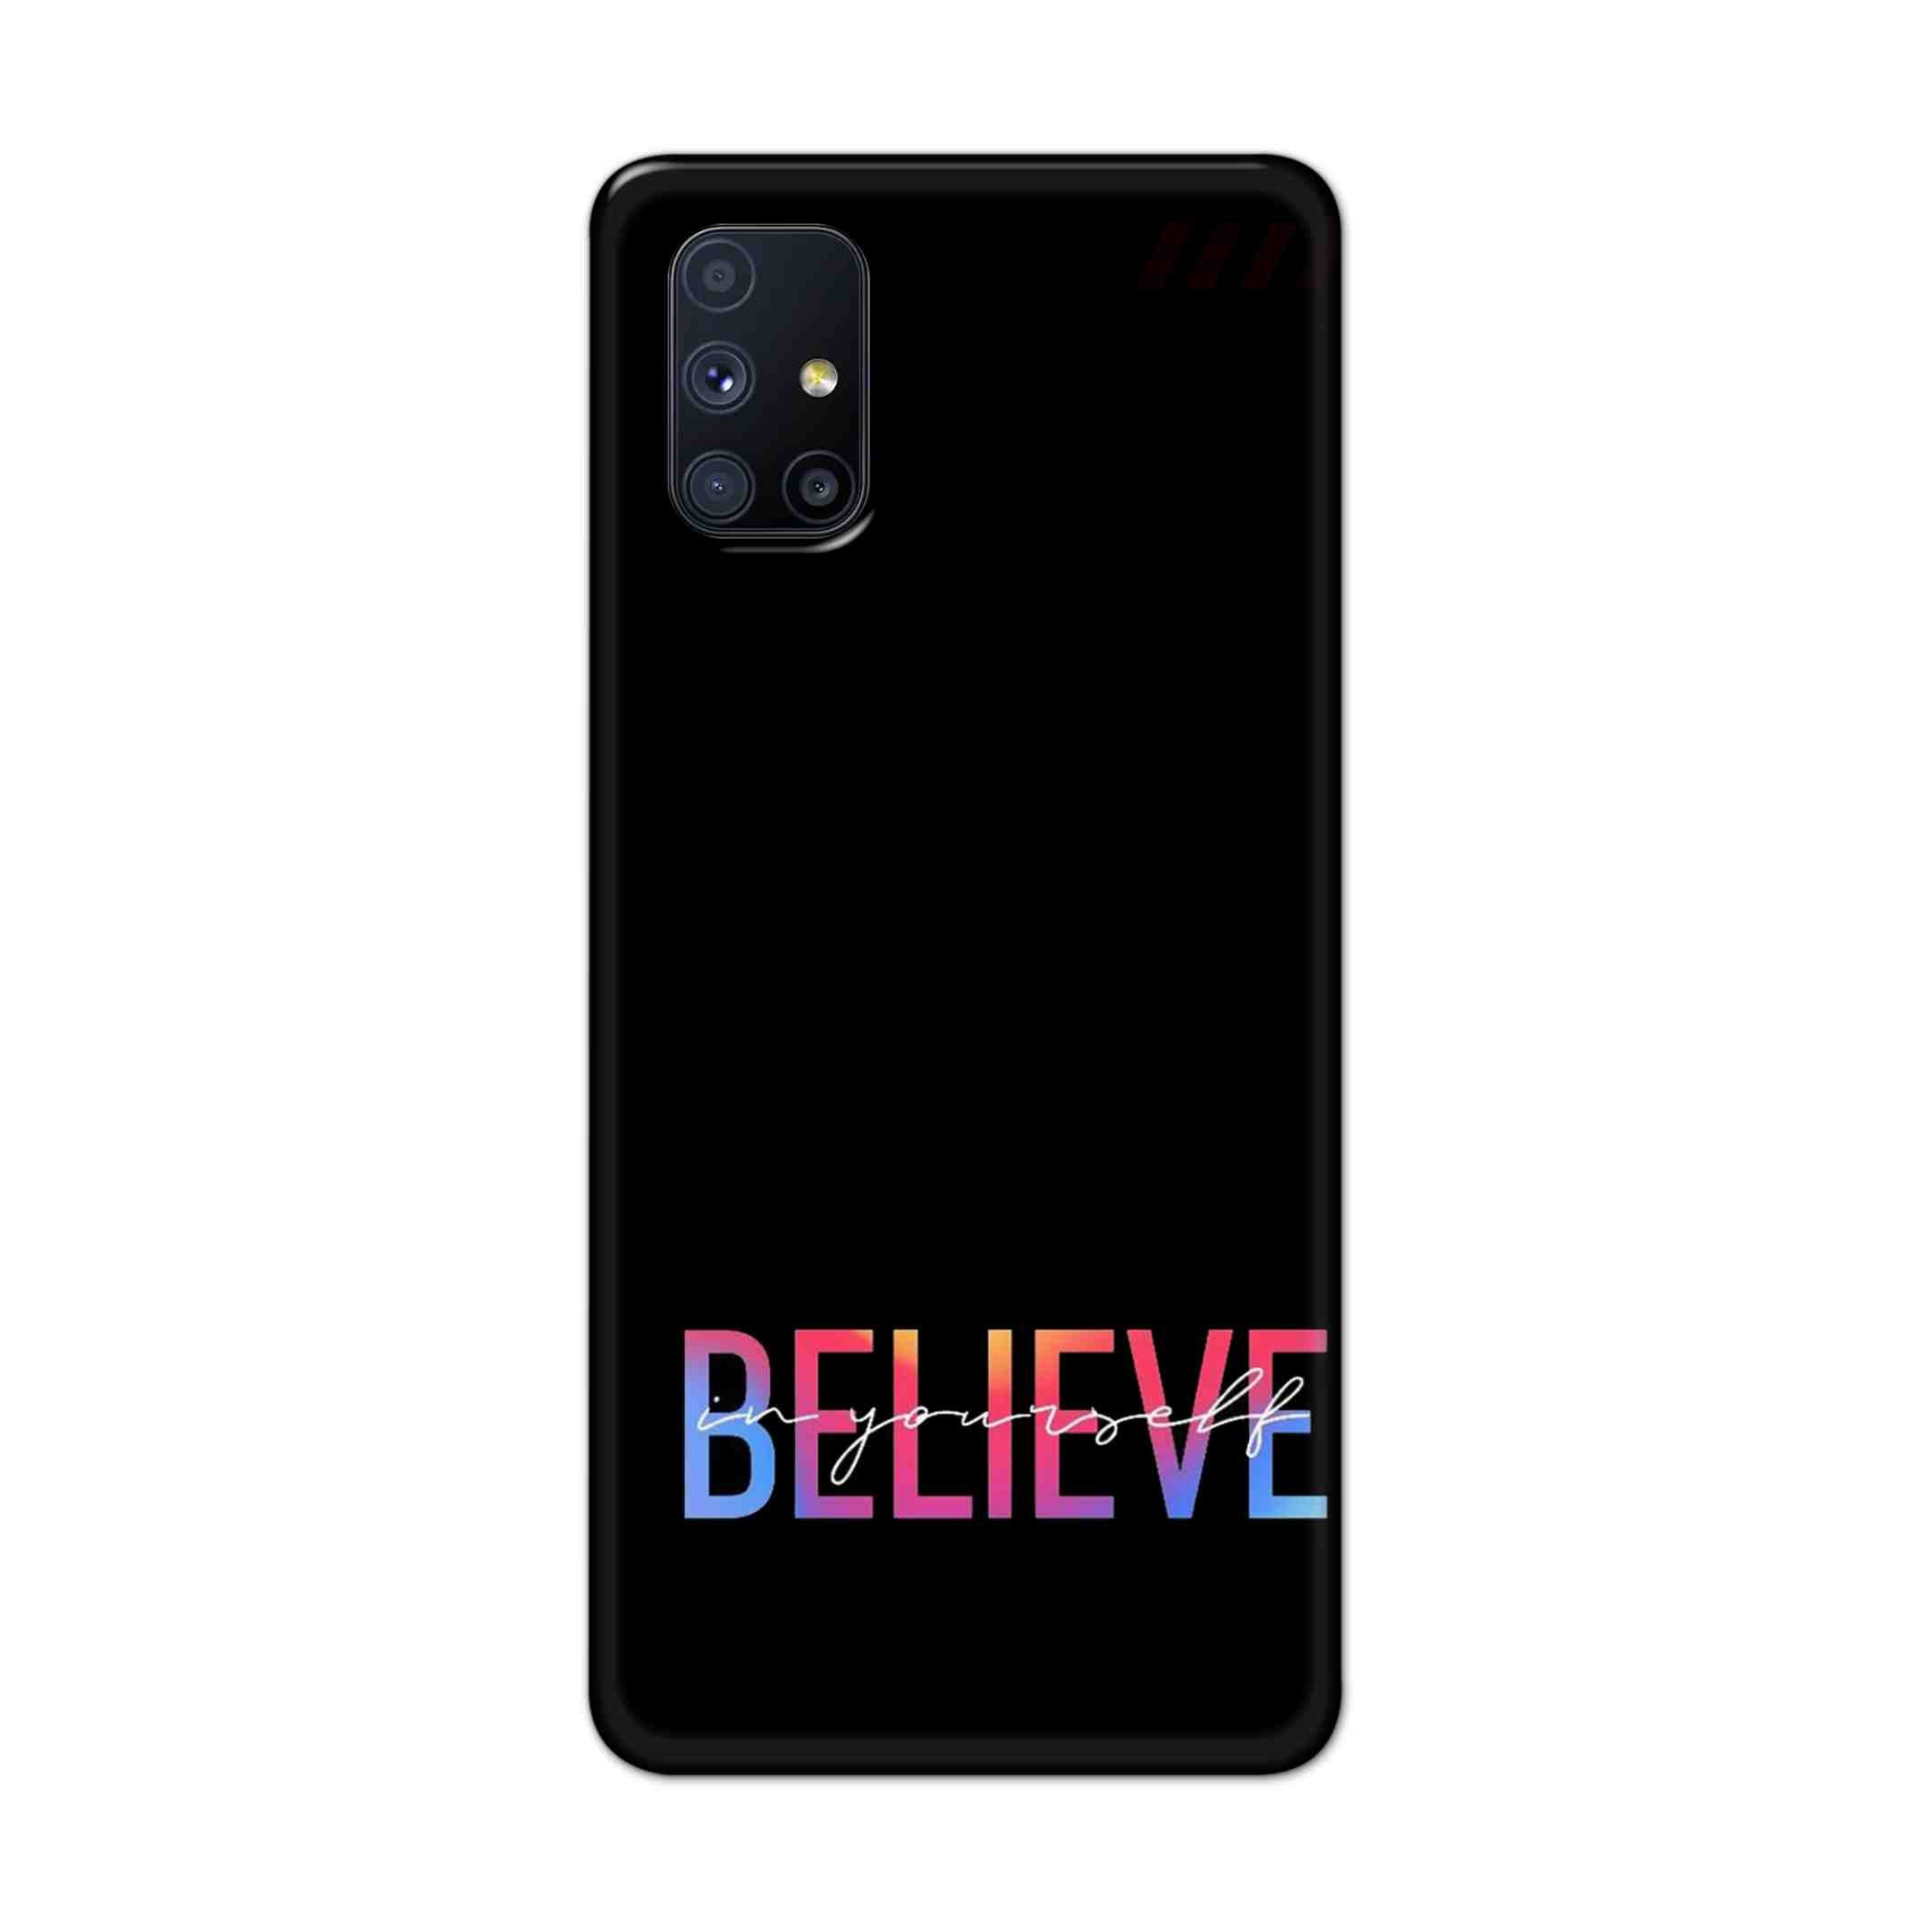 Buy Believe Hard Back Mobile Phone Case Cover For Samsung Galaxy M51 Online